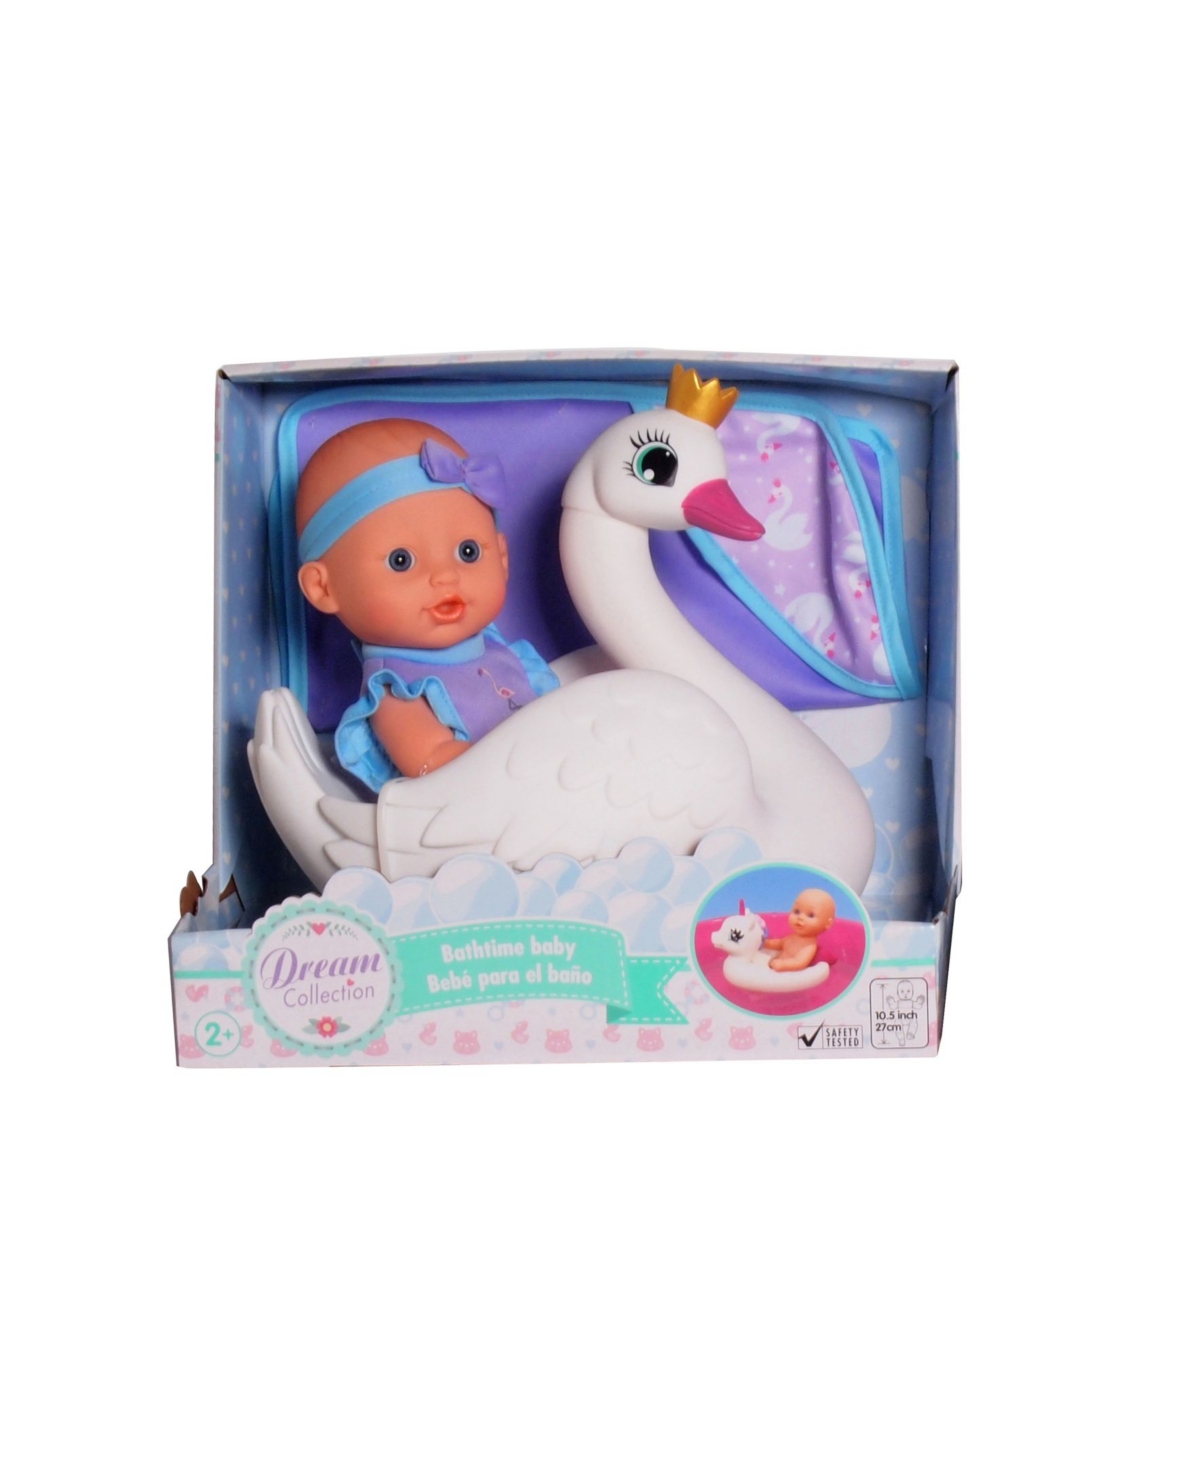 Redbox Dream Collection 10" Pretend Play Bath Time Baby Doll With Swan Float In Multi